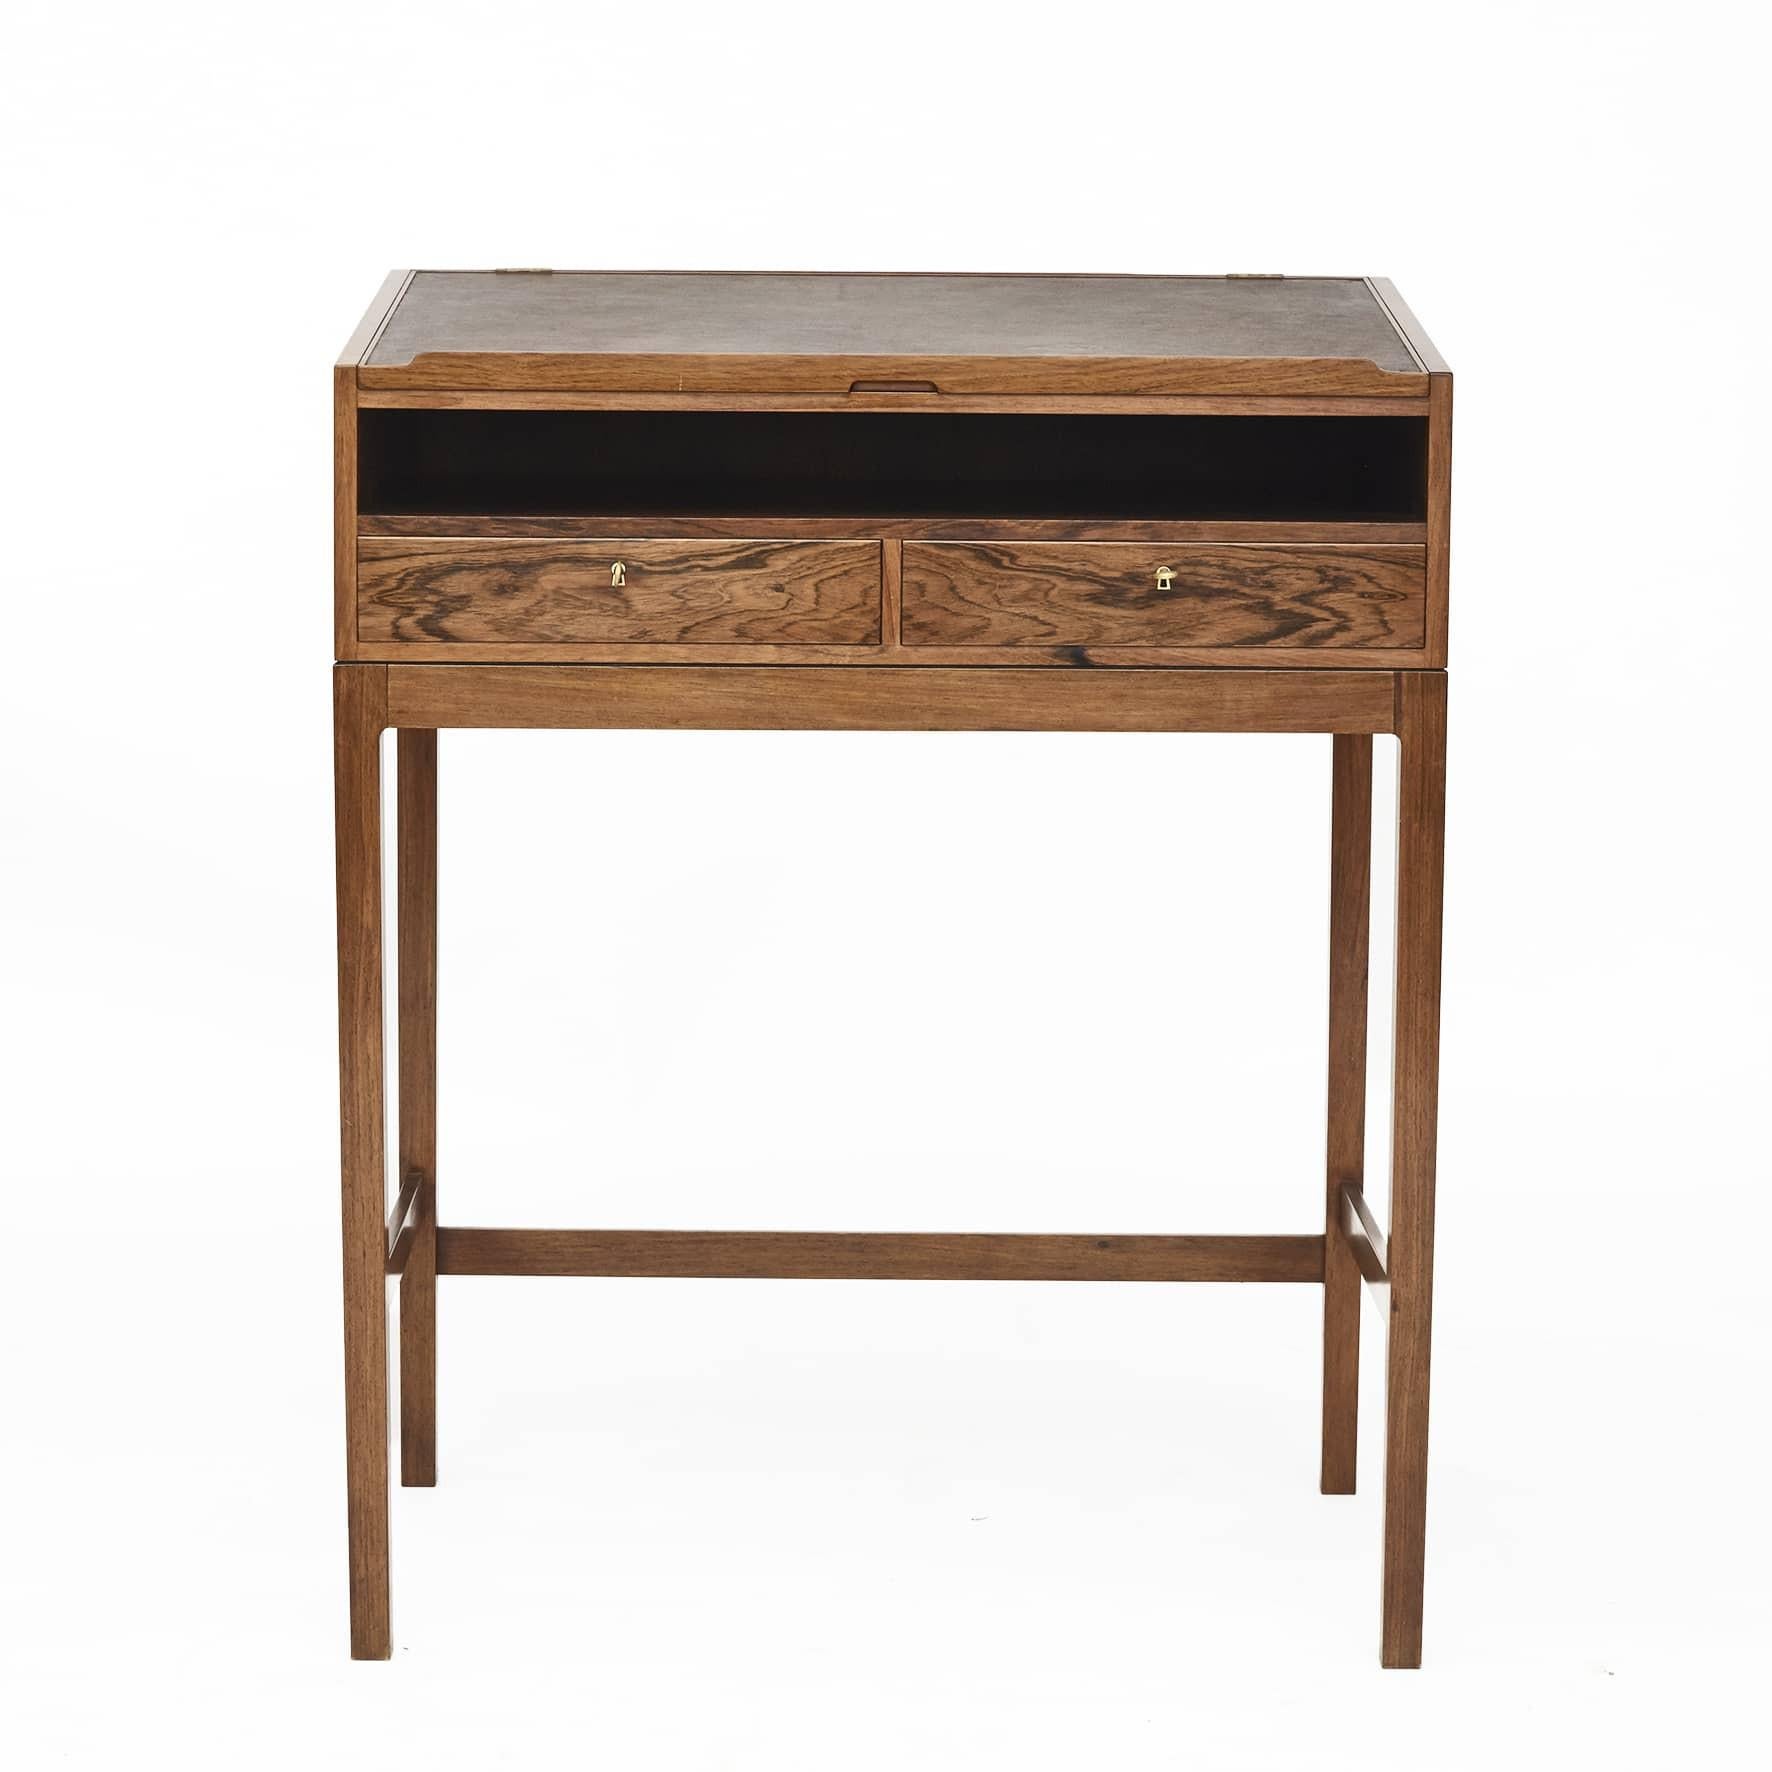 Jørgen Berg.
Danish writing desk in Rio rosewood.
Fall-front fitted with a writing slope with brown leather that lifts up to reveal an open interior storage compartment. Under the sloped top is a storage space above 2 drawers.
Raised on four